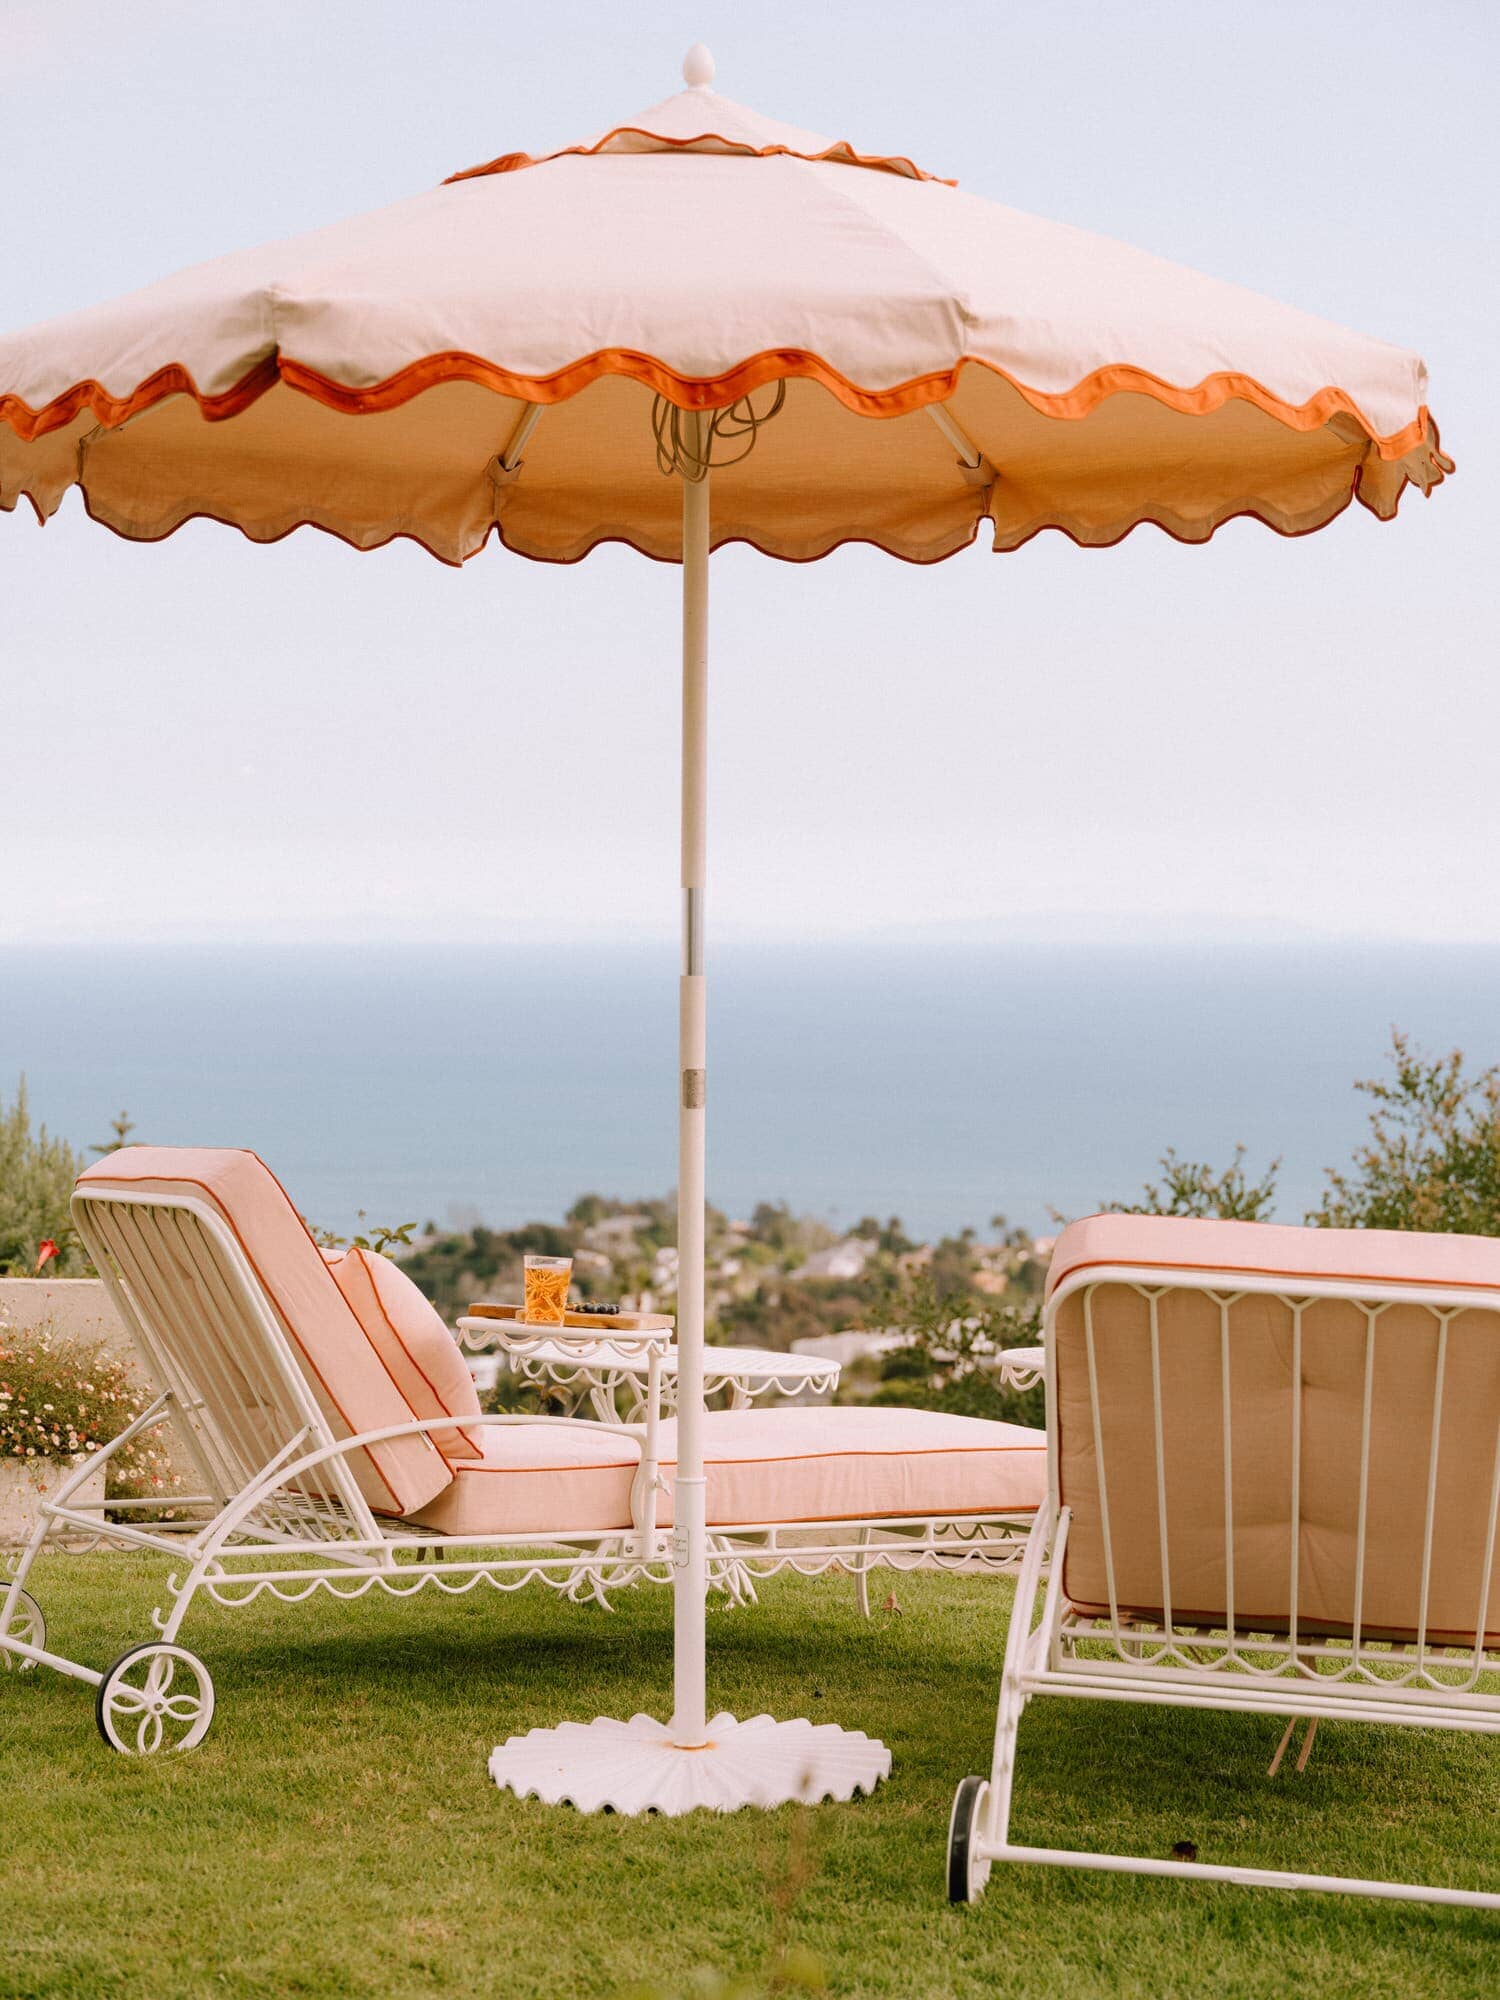 Riviera pink sun loungers with umbrella on the grass